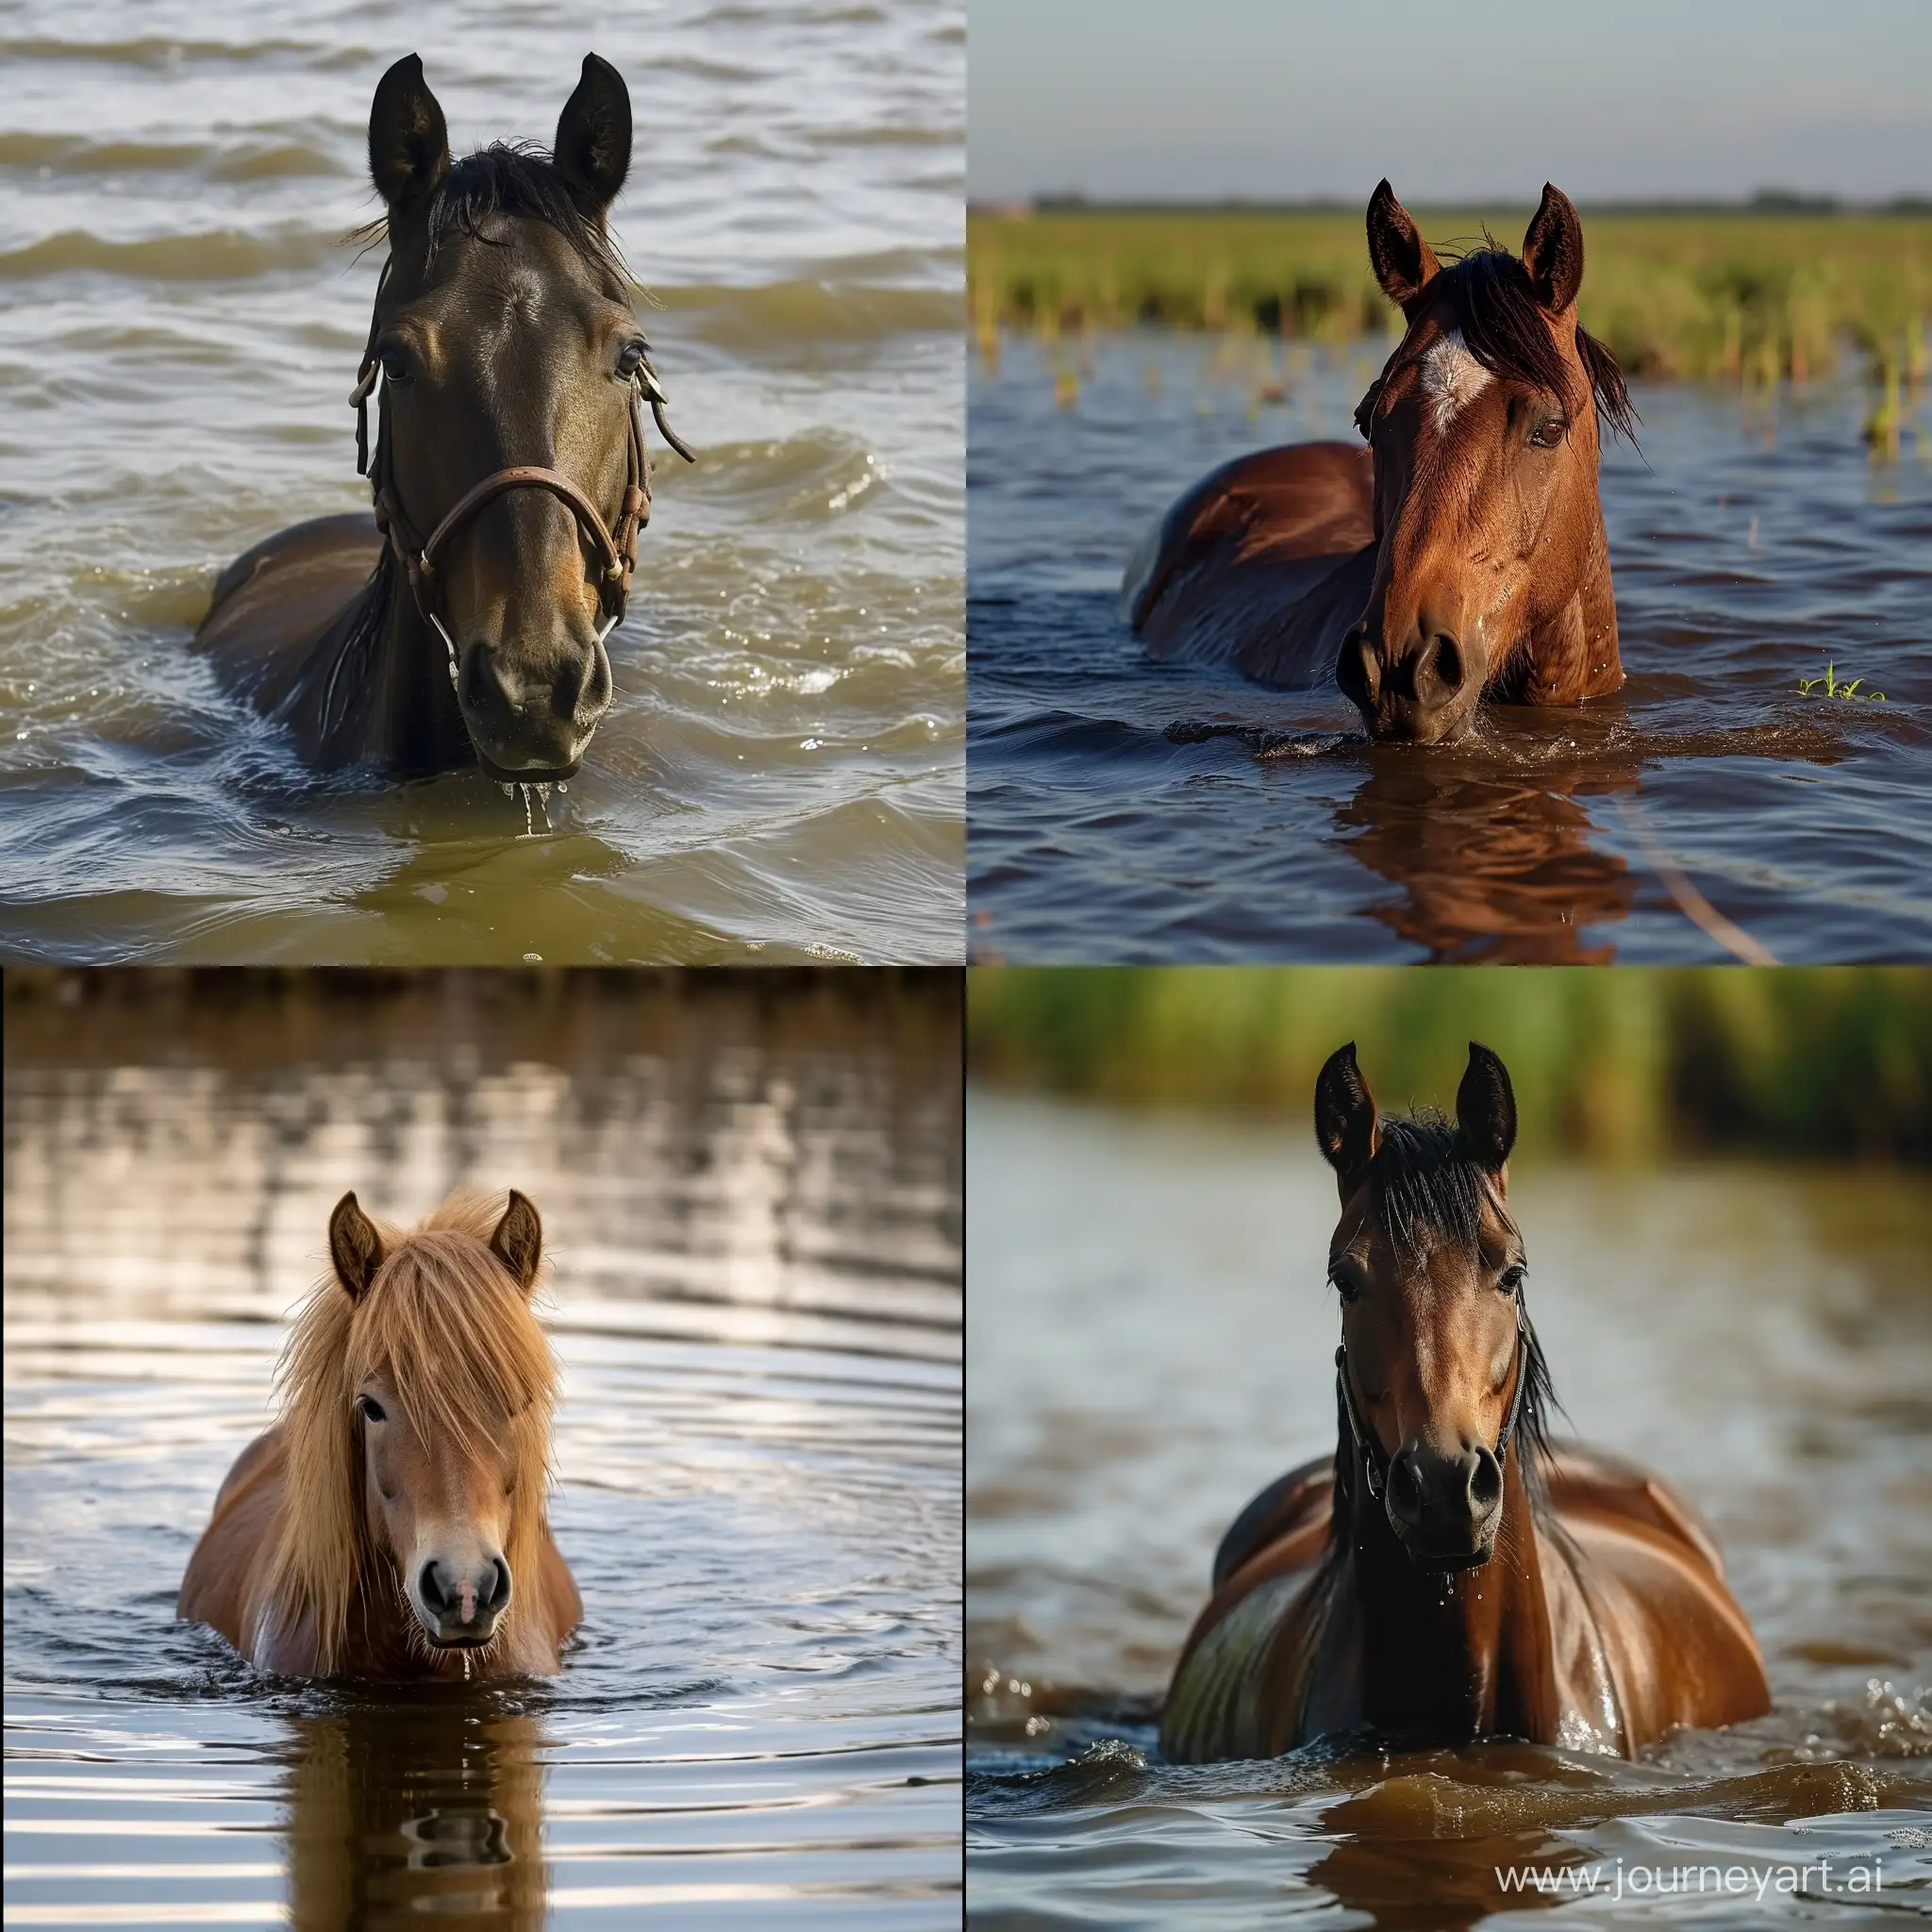 Majestic-Horse-Tranquilly-Submerged-in-Water